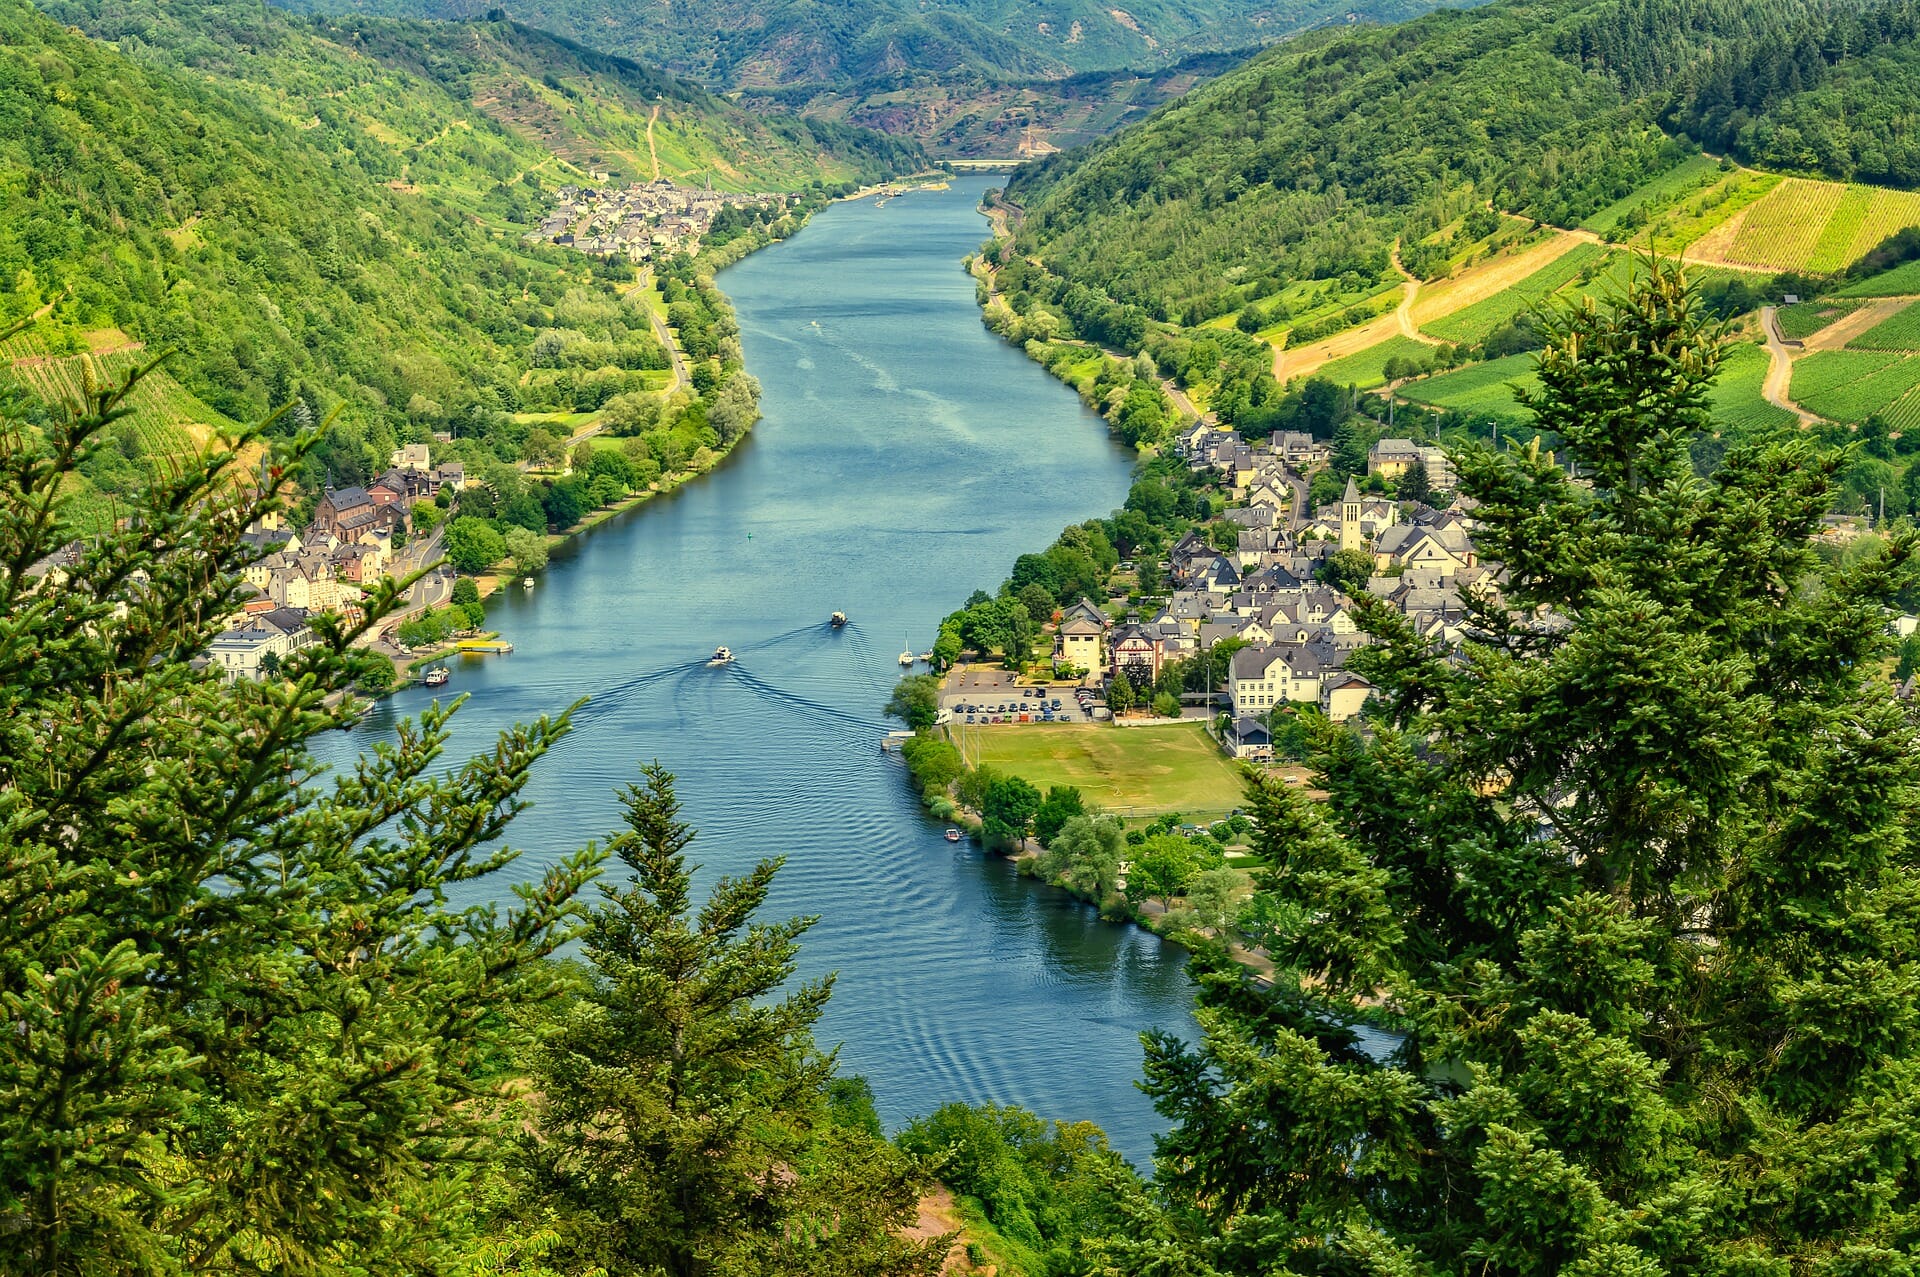 View of the Mosel river in Germany with boats sailing and vineyards being tended to while homes rest comfortably near the water